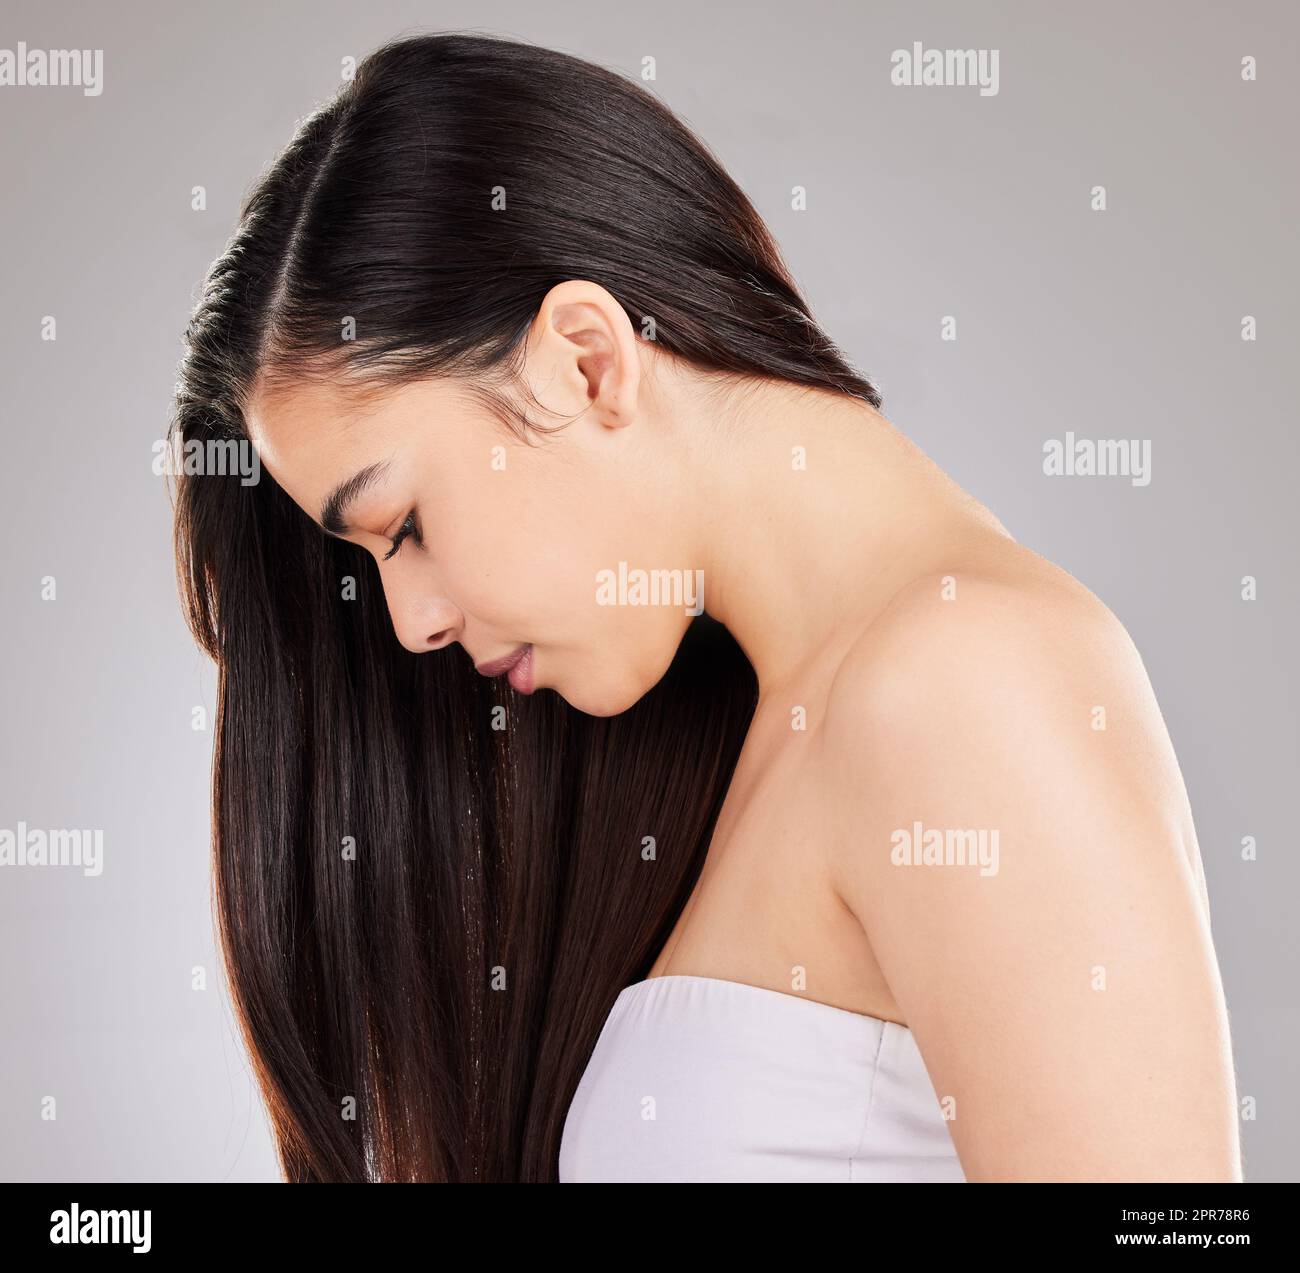 Take care of your hair. Studio shot of a young woman with beautiful long hair. Stock Photo